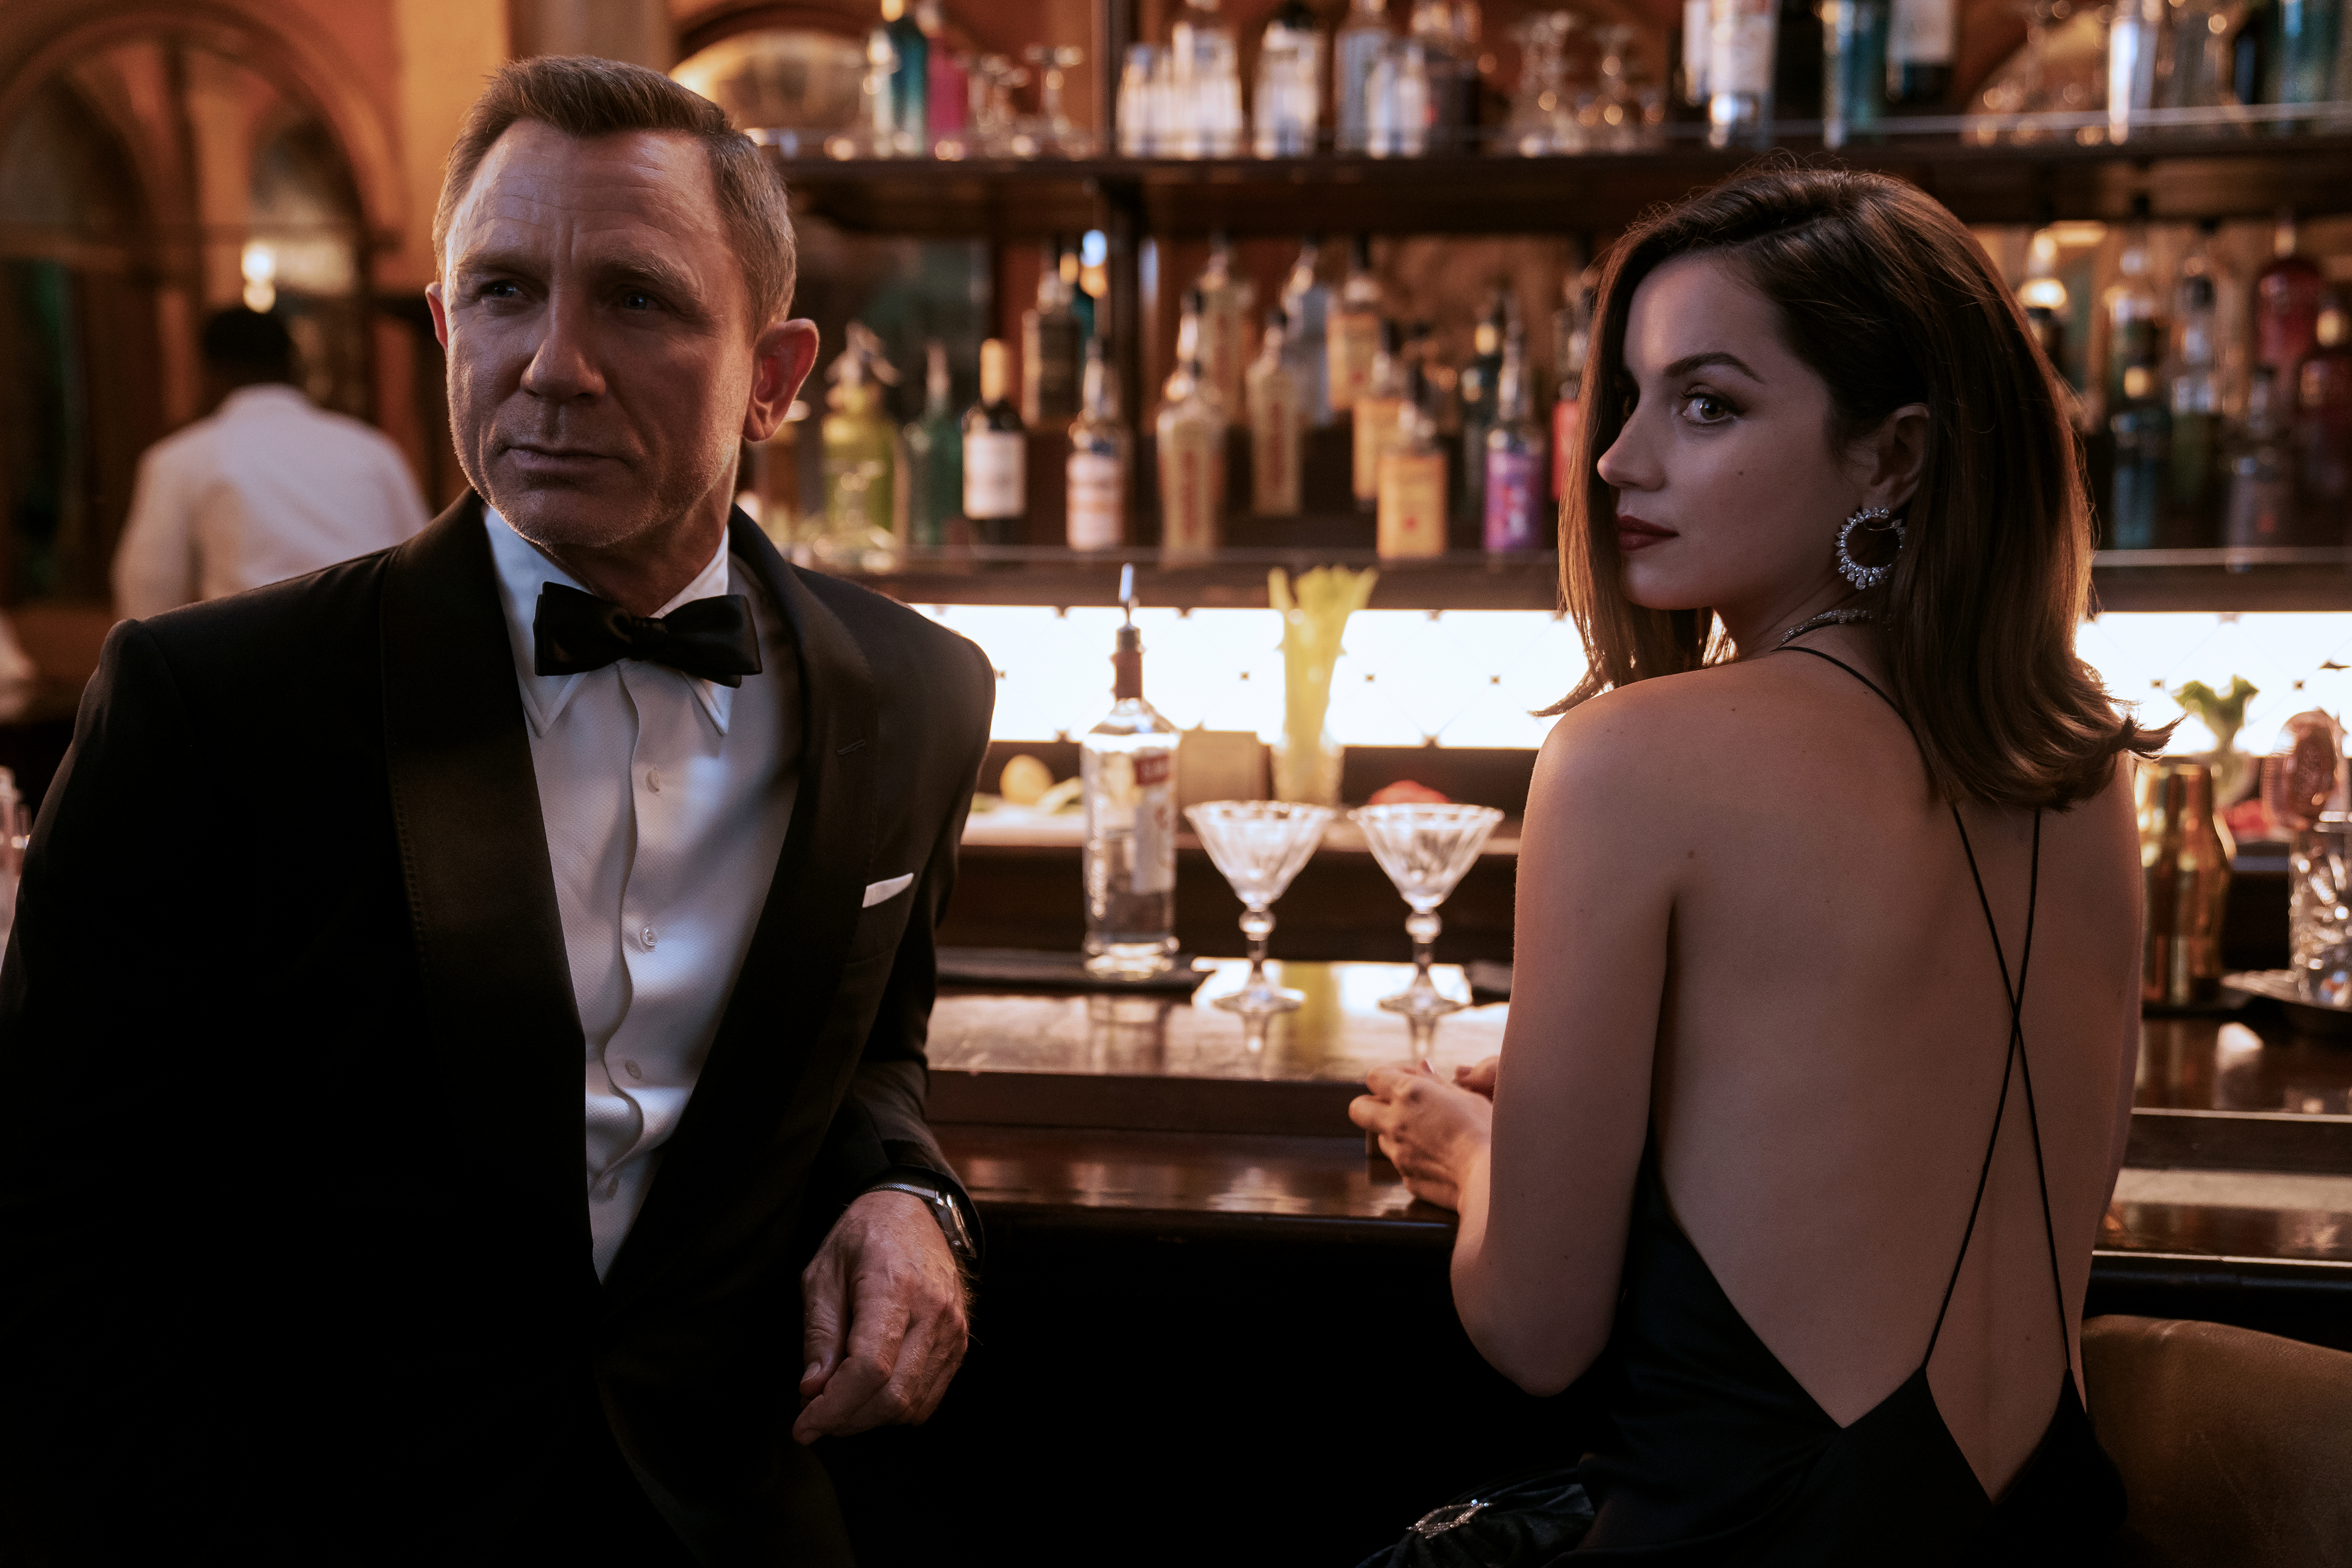 JAMES Bond returns in a breathtaking new bumper-length trailer for No Time To Die.